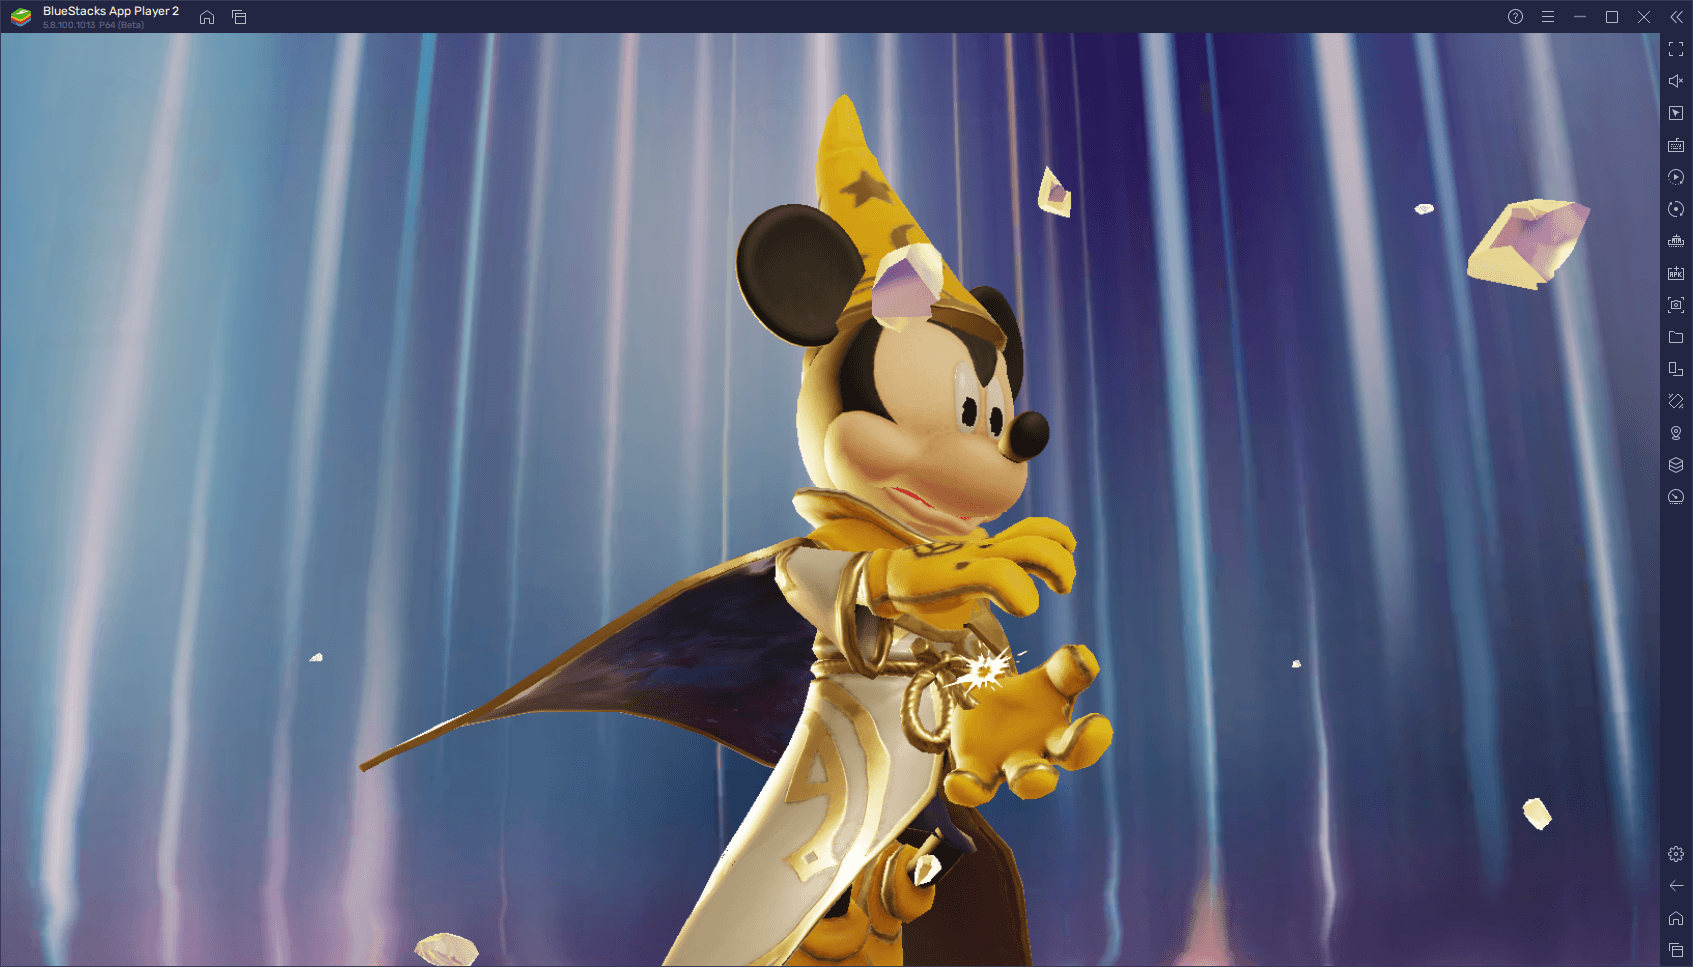 How to Enhance Your Gameplay in Disney Mirrorverse on PC With BlueStacks